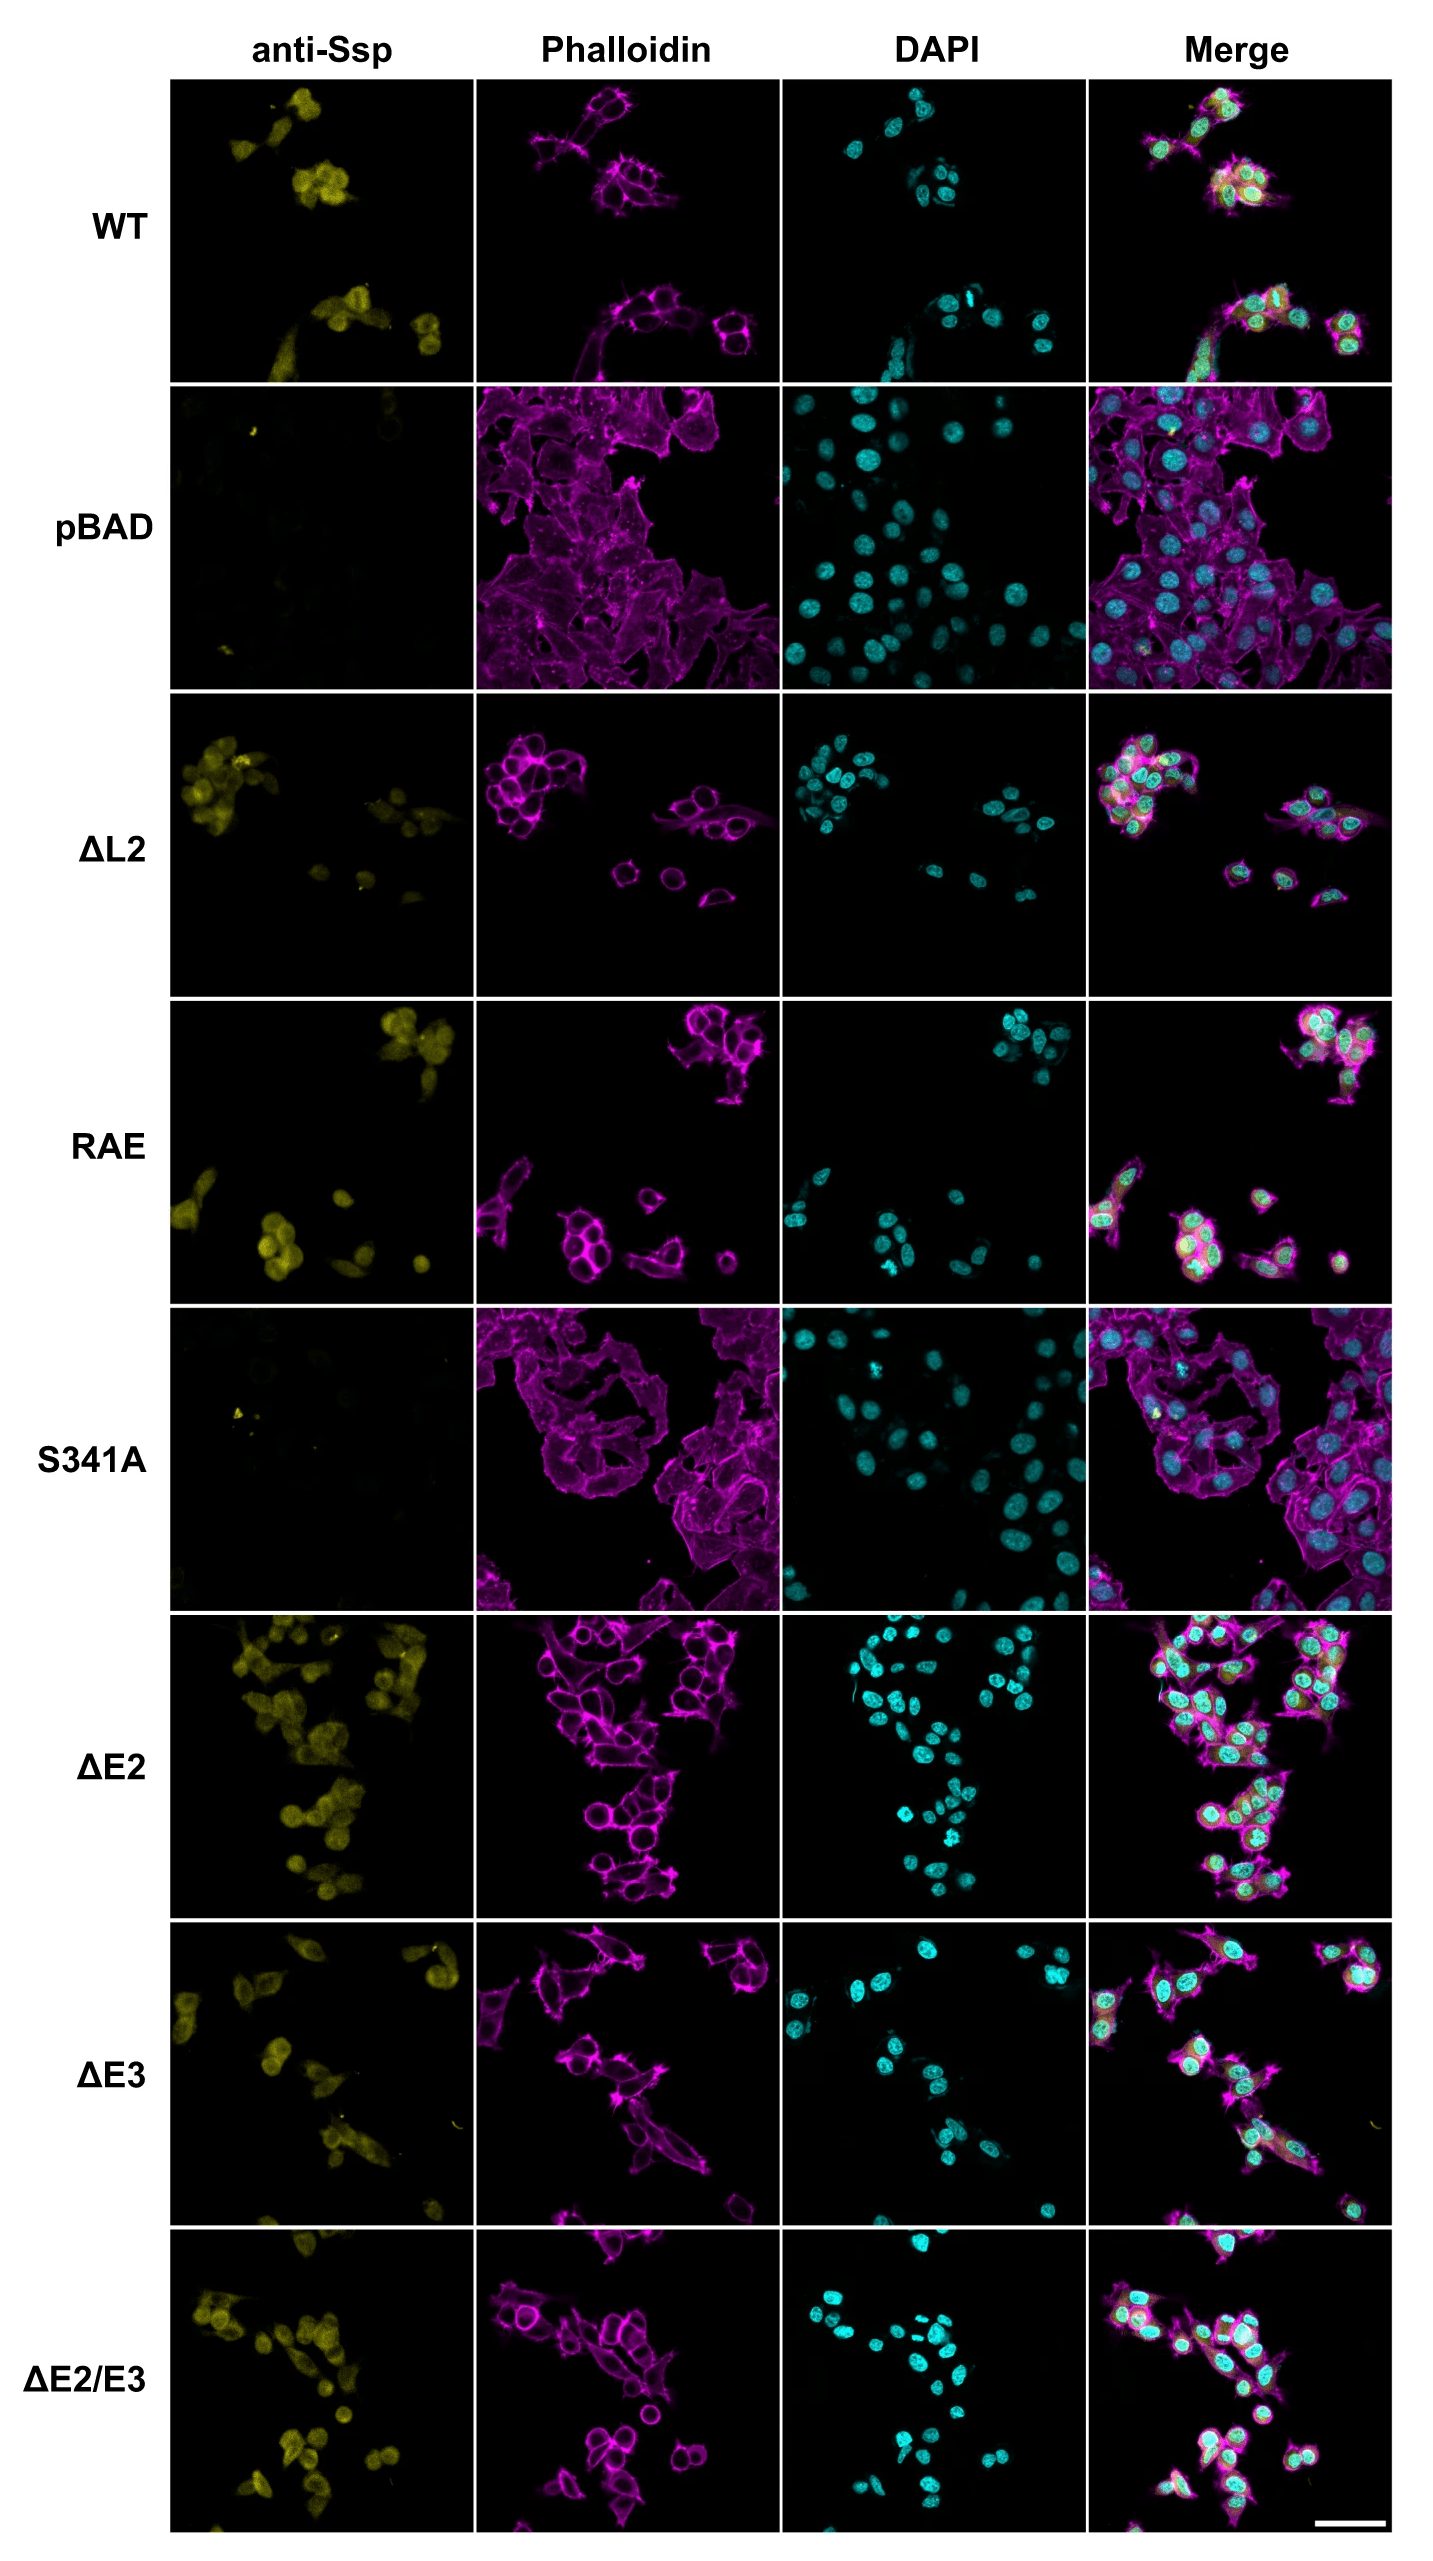 Confocal microscopy images of HEp-2 cells incubated with concentrated culture supernatants of Ssp variants (25 μg/mL) for 5 h. Ssp was visualised with anti-Ssp polyclonal antibody followed by Alexa Fluor Plus 647 conjugated secondary antibody (yellow), actin cytoskeleton was stained with iFluor 555 phalloidin (magenta) and nucleus stained with DAPI (cyan). Ssp variants include wildtype (WT), deletions of Loop 2 (ΔL2), deletion of active site protrusions E2 and E3 (ΔE2, ΔE3, ΔE2/ΔE3), and site-directed mutants of the active site Ser (S314A) and RGD motif (RAE). pBAD denotes vector only control. Images are representative of cells observed from at least three independent experiments. Scale bar represents 50 μm. Source: <b>Crystal structure of a subtilisin-like autotransporter passenger domain reveals insights into its cytotoxic function</b>. by Hor, <em>et. al.</em>., <em>Nature Communications</em>, March 2023.